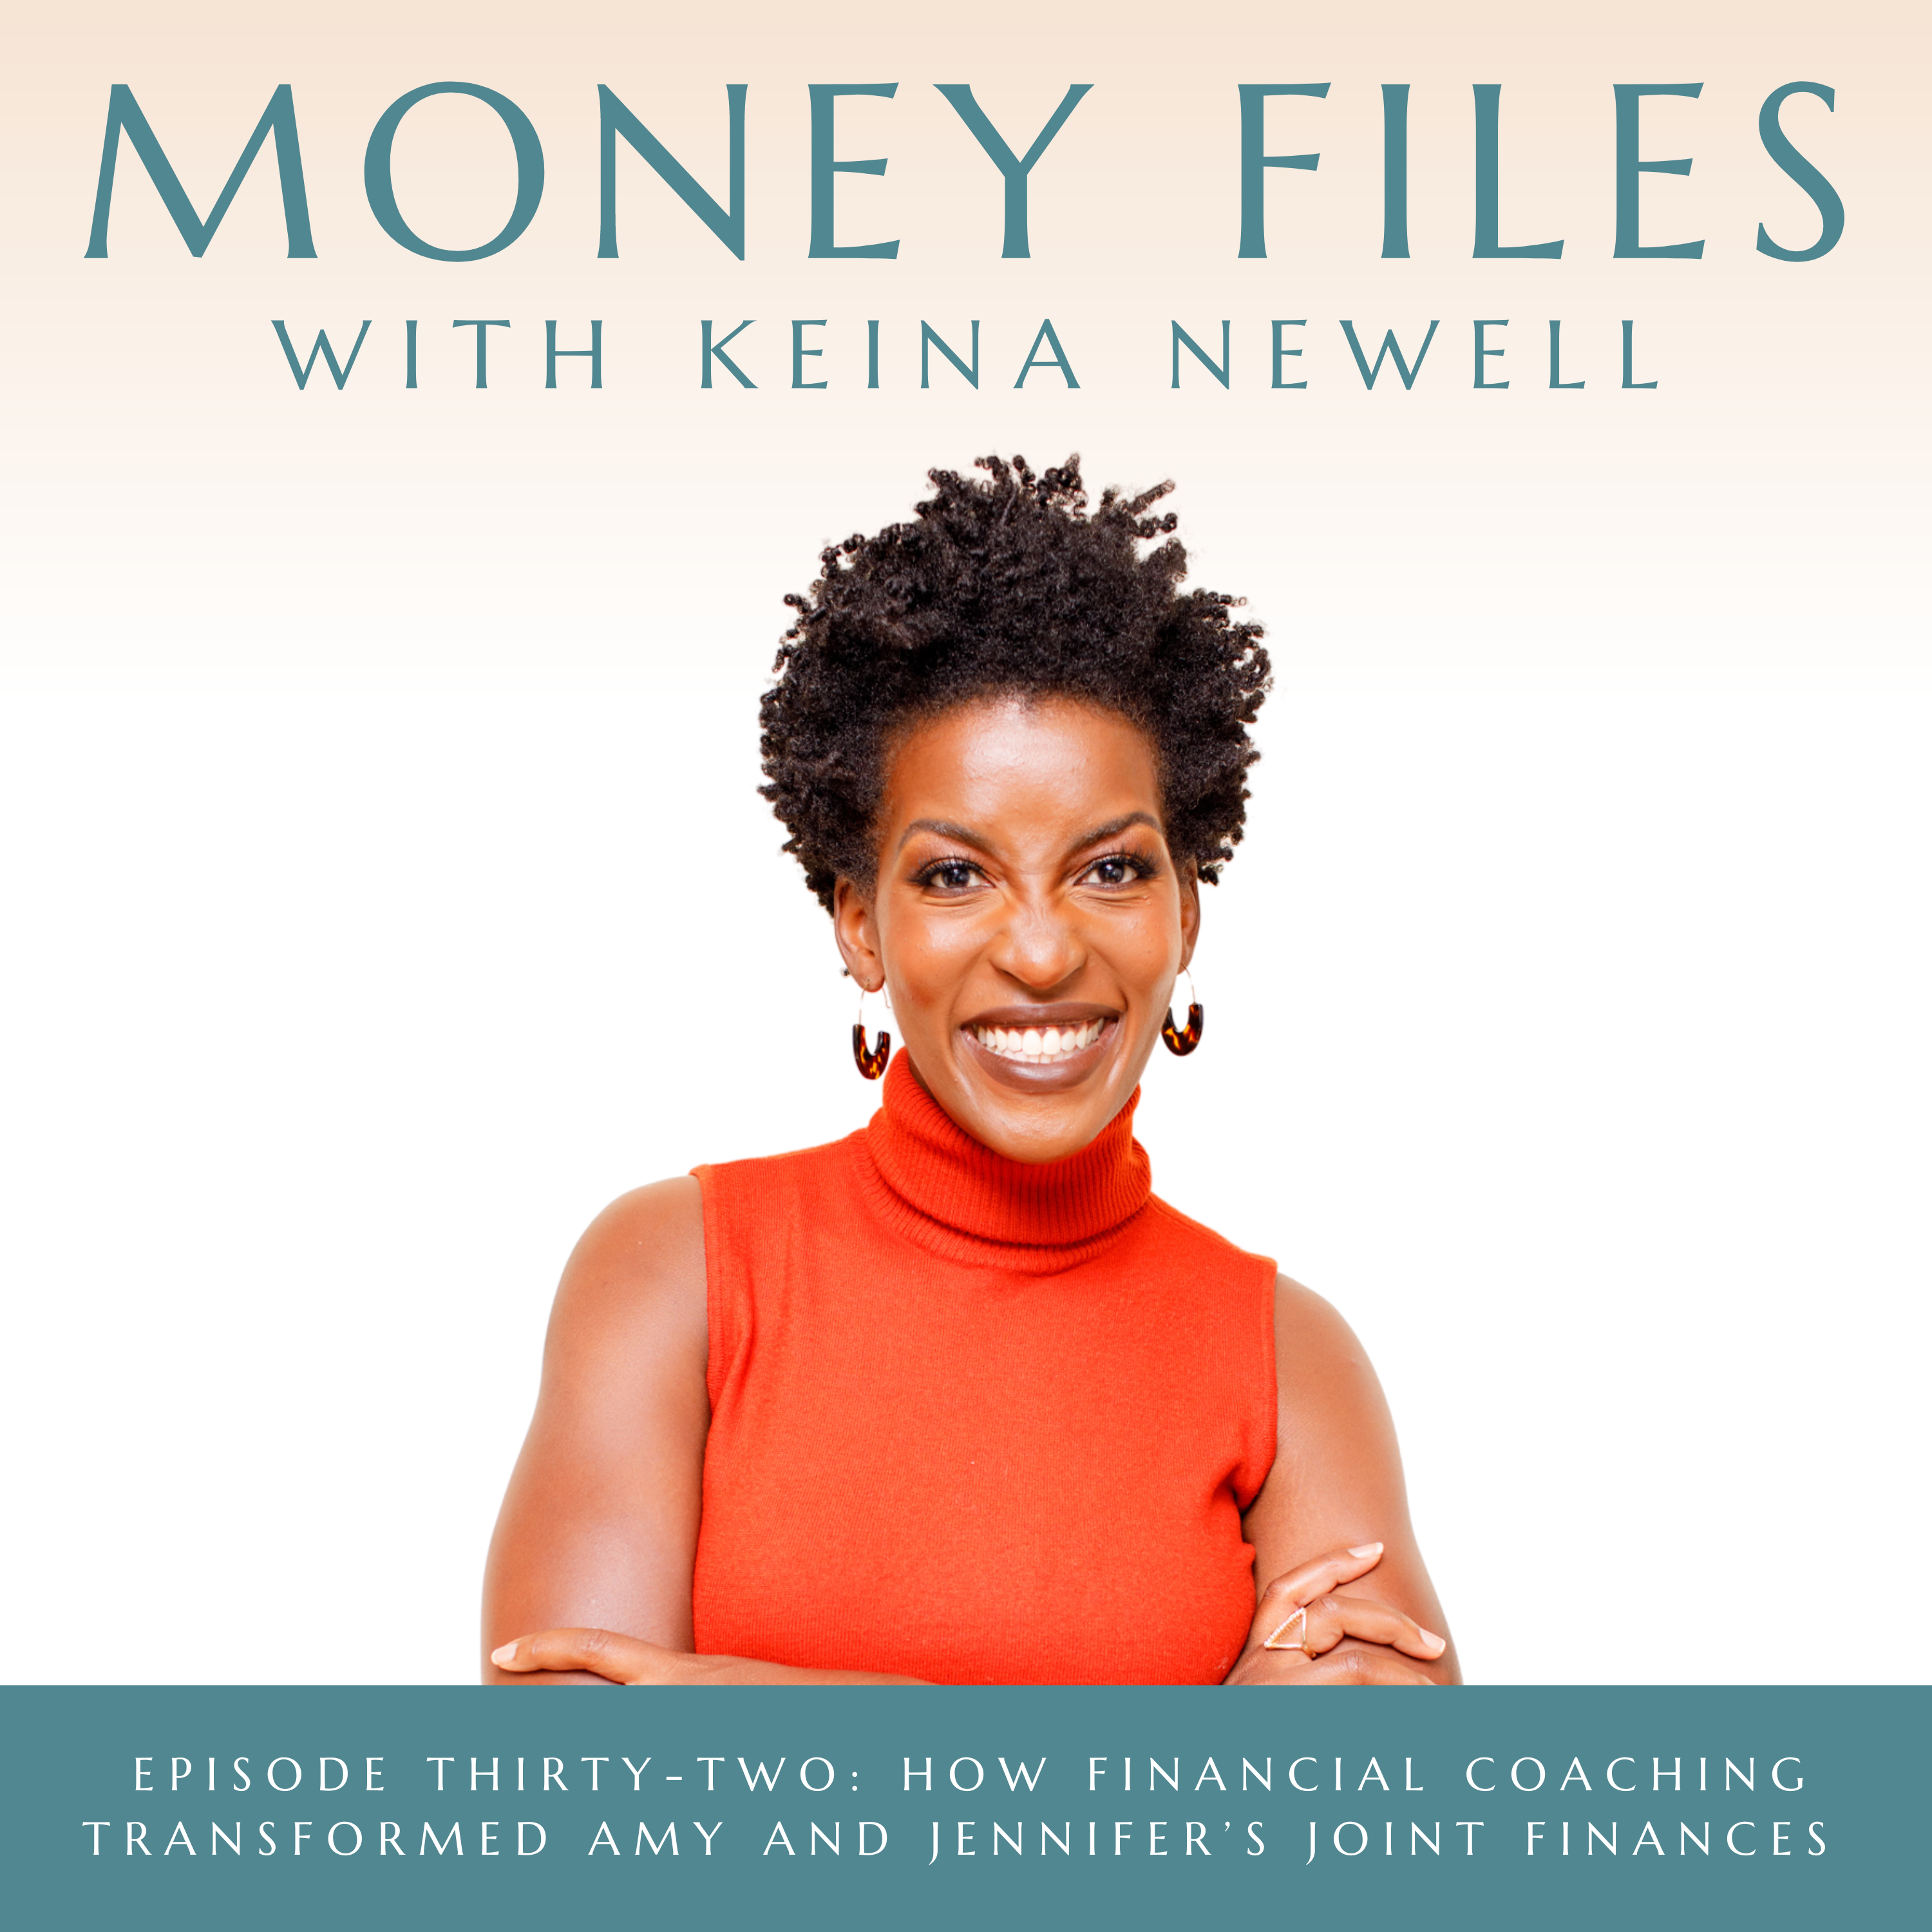 How Financial Coaching Transformed Amy and Jennifer’s Joint Finances